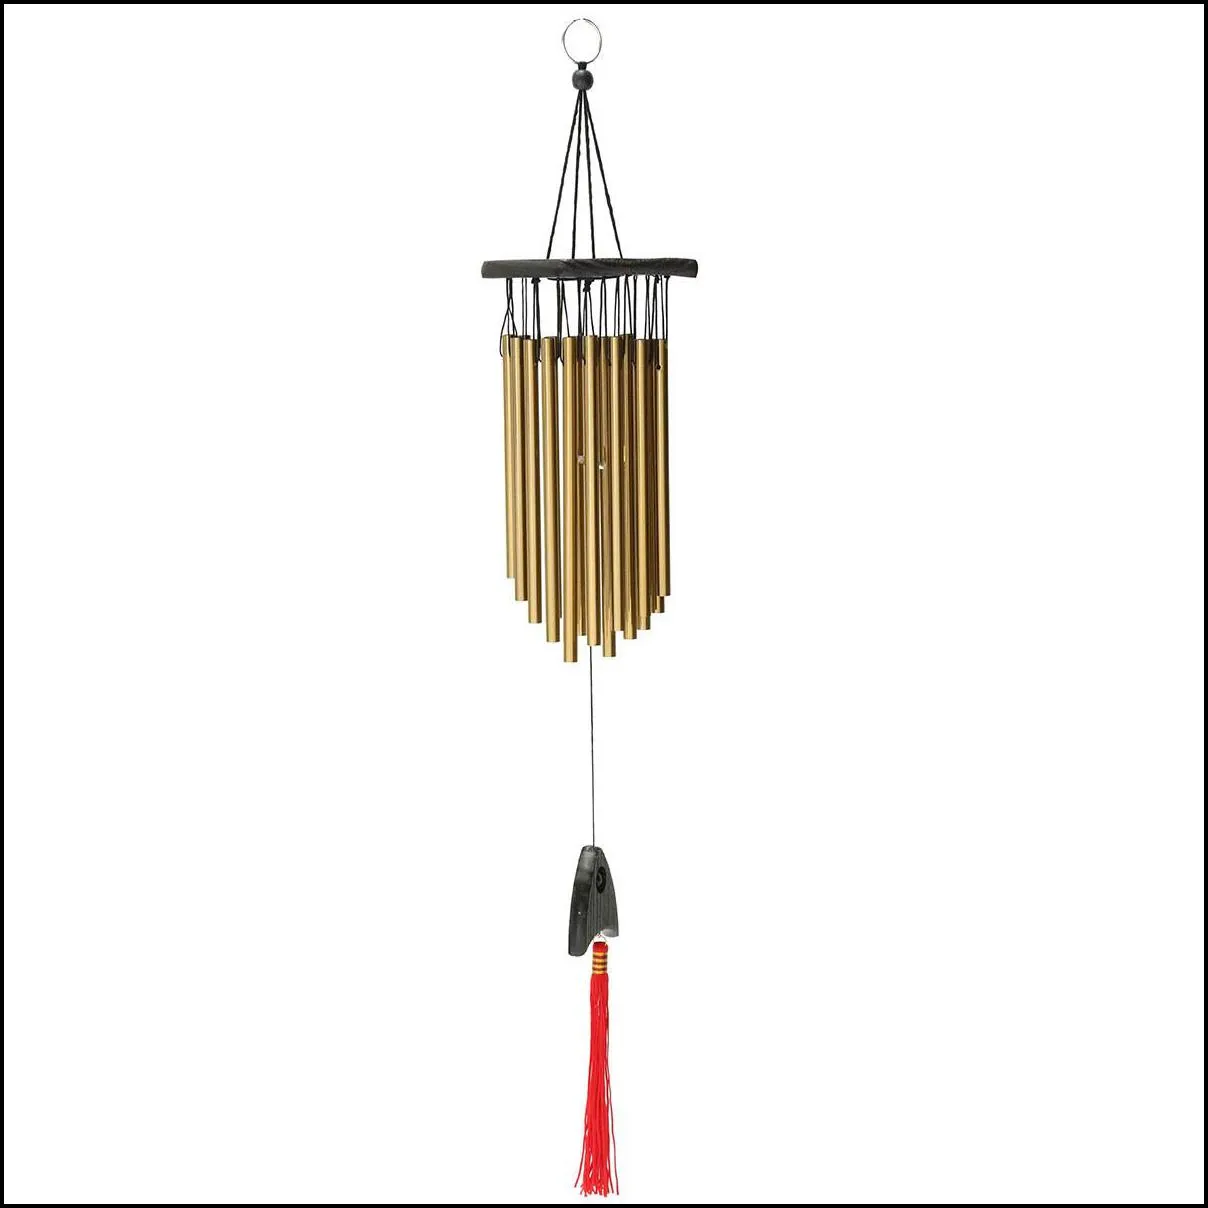 wood and metal aeolian bells hanging 16 tubes wind chimes yard garden outdoor living windchimes home decor christmas gift y200903